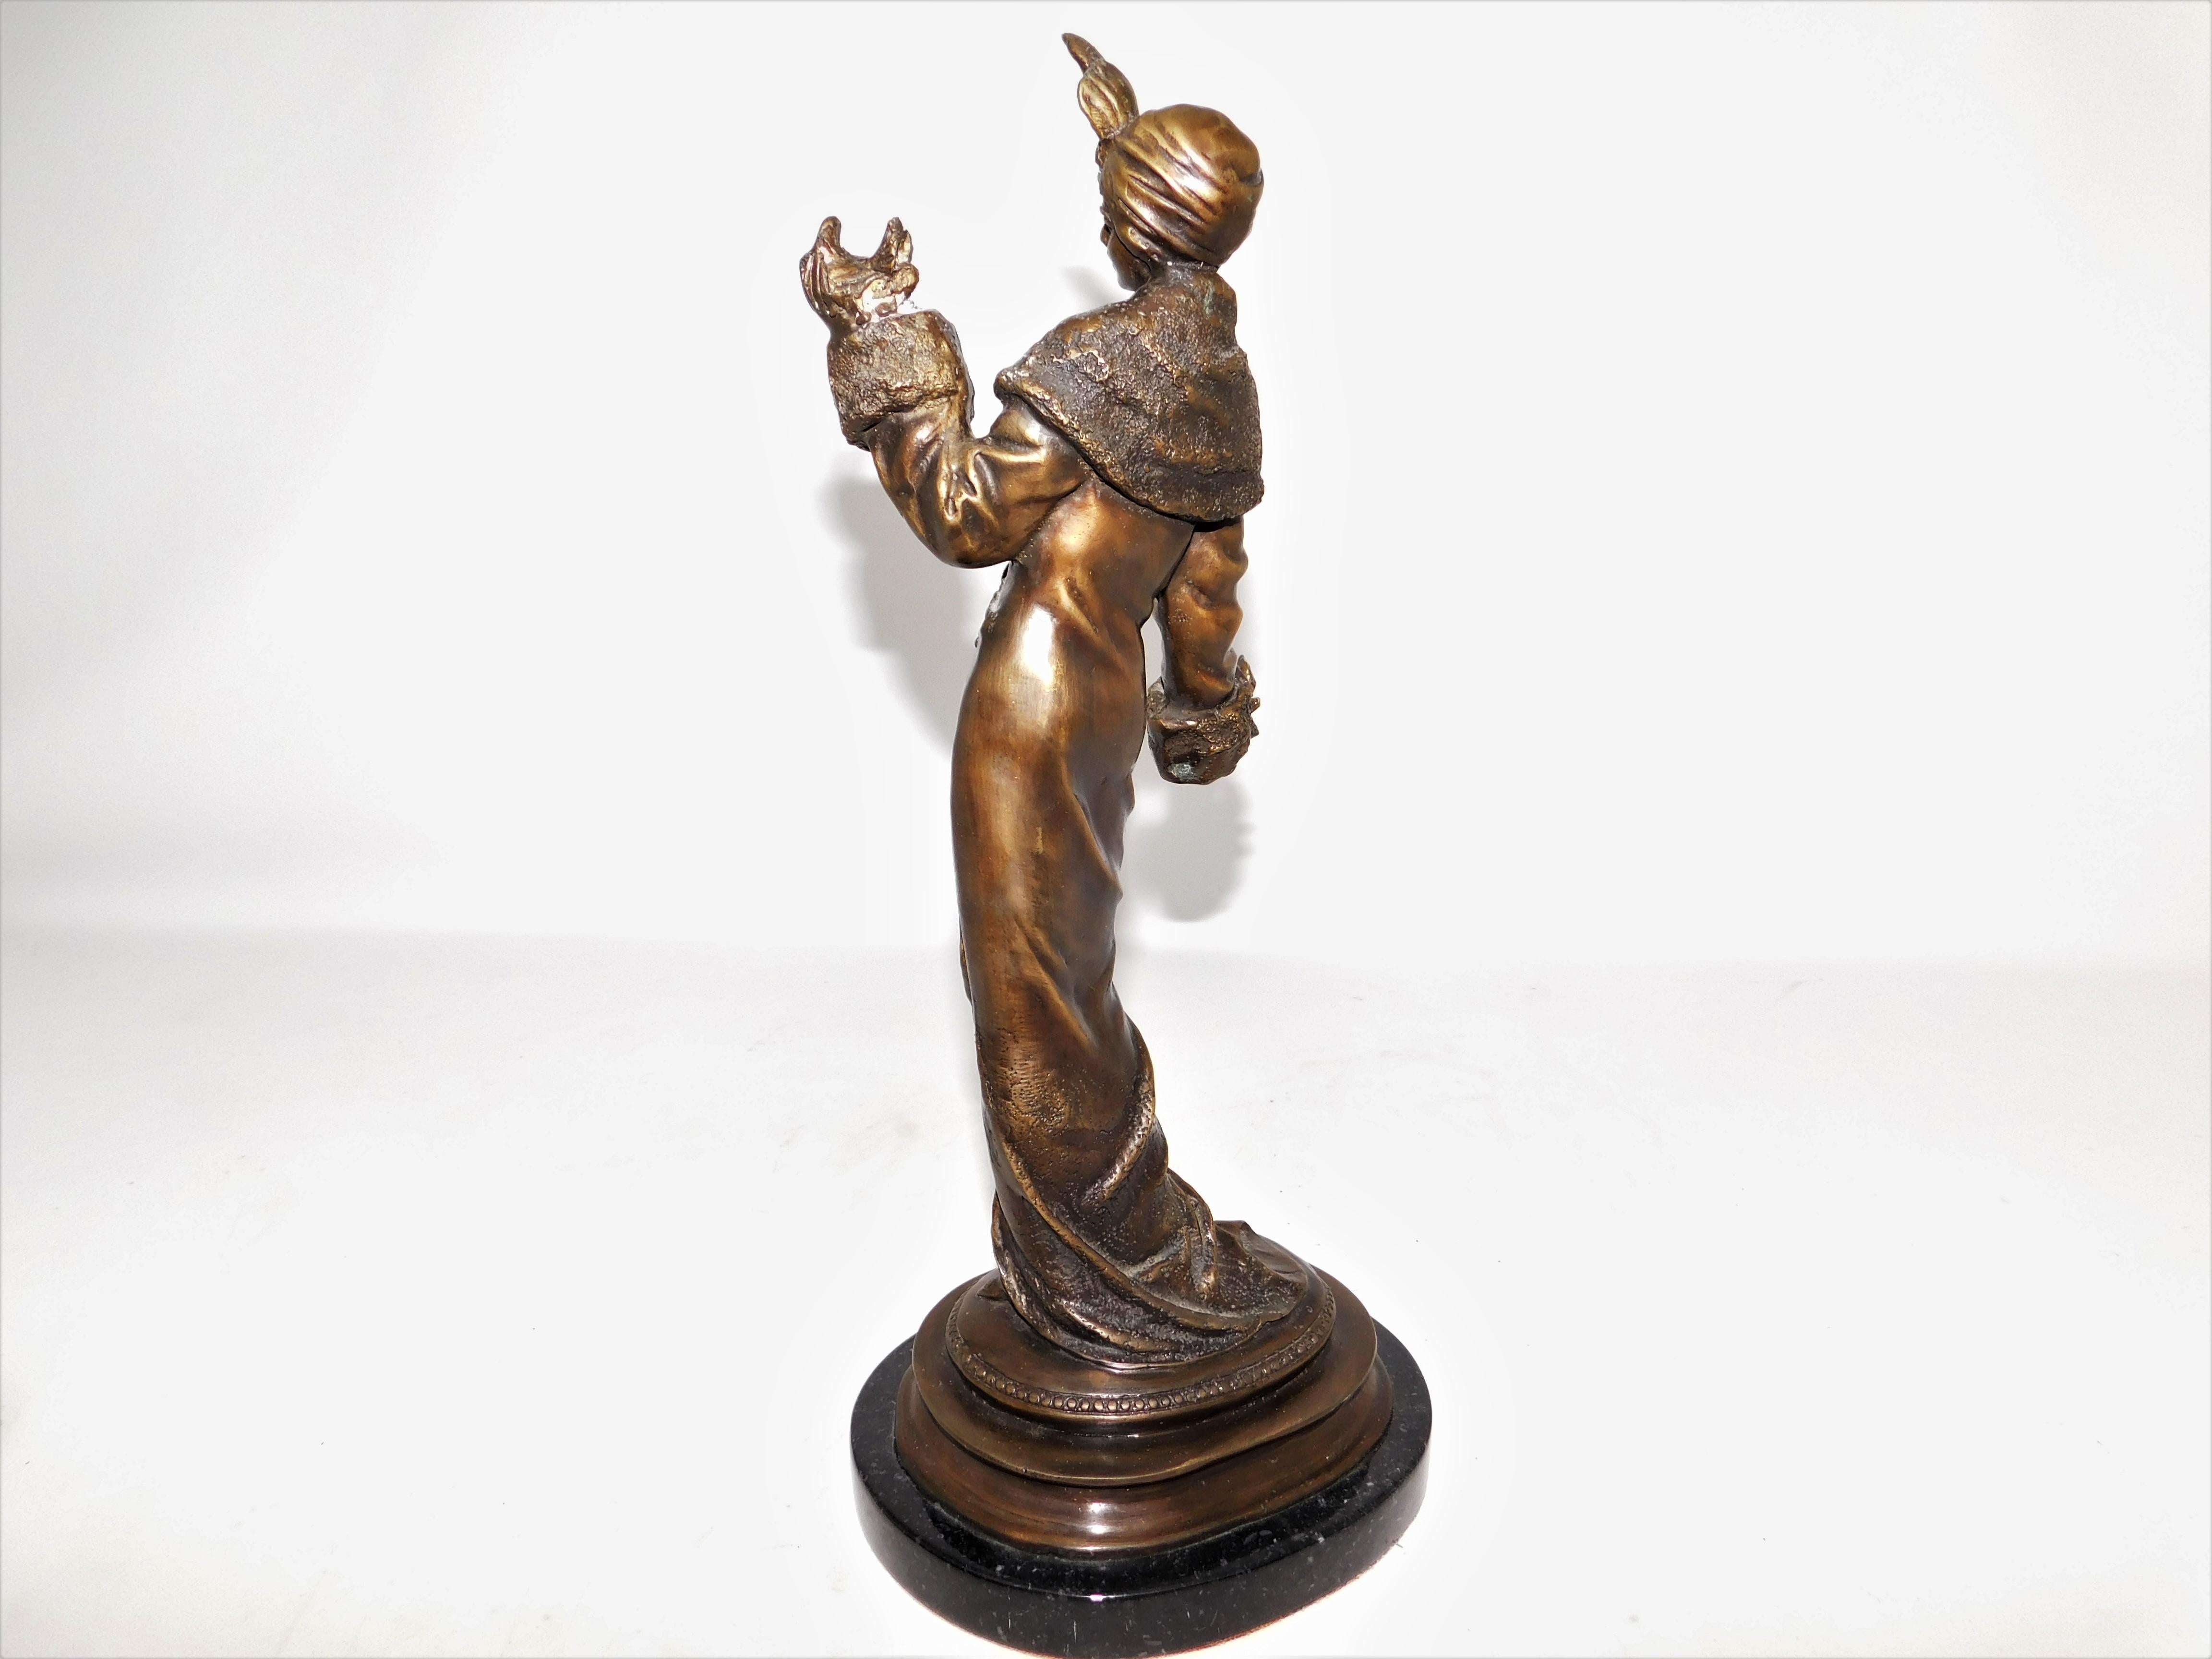 Early 20th Century Bronze Art Deco Figurine Sculpture Woman with Doves in Flowing Dress on Marble For Sale